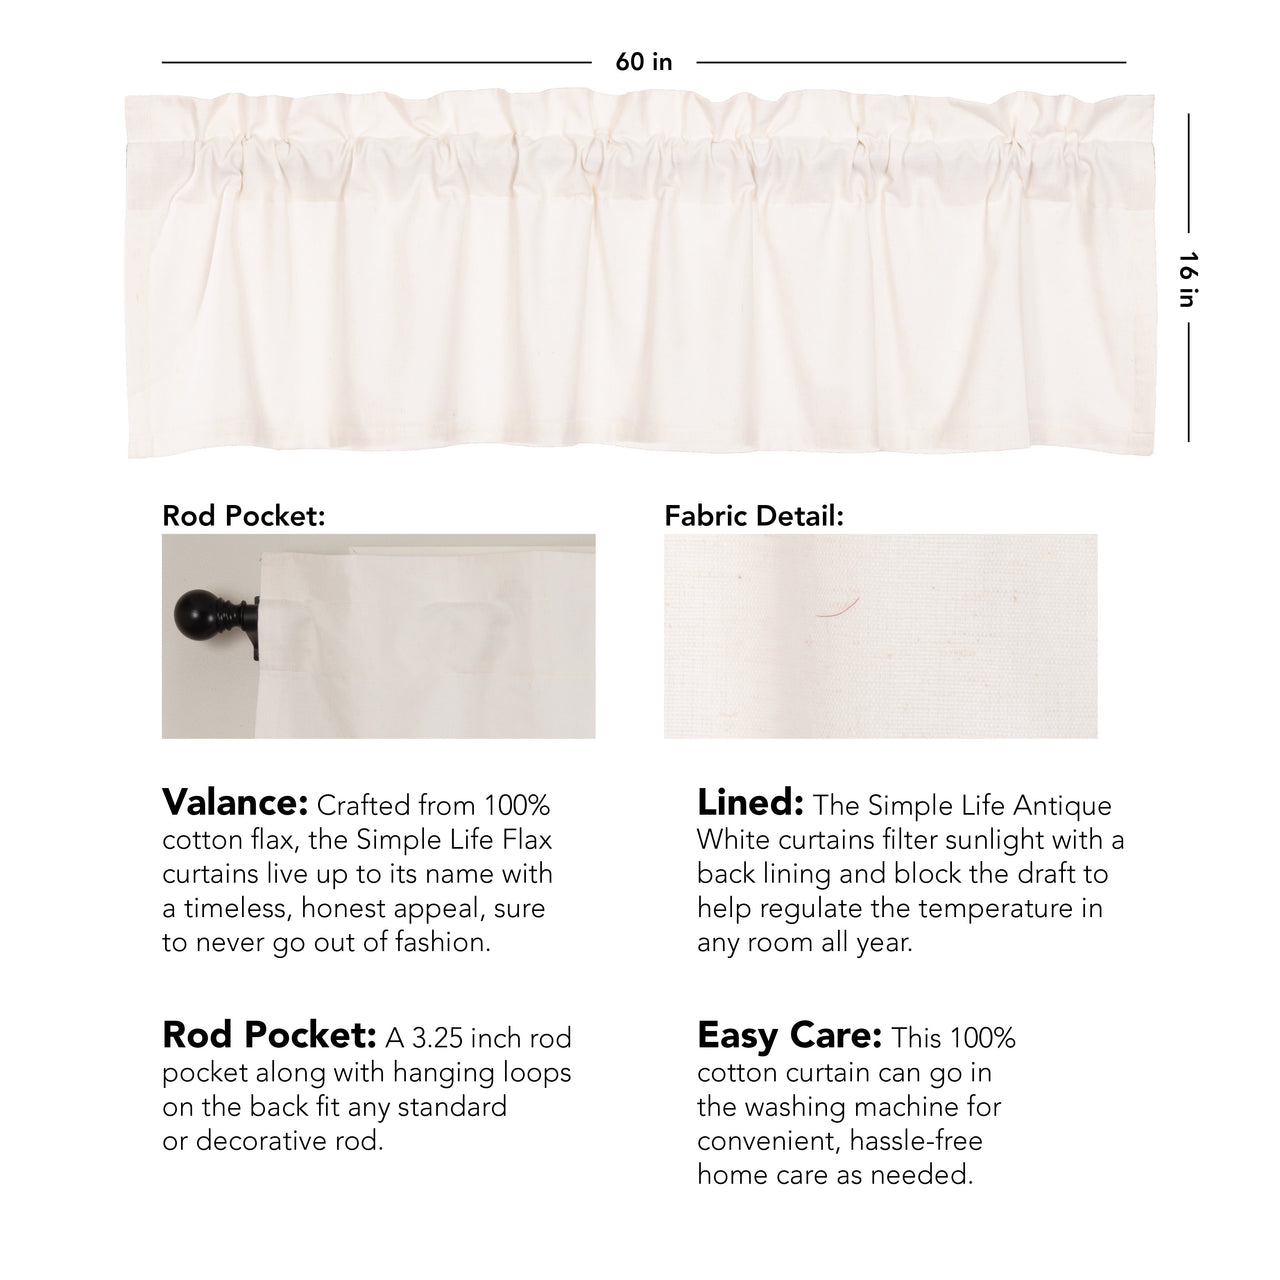 Simple Life Flax Antique White Valance Curtain 16x60 VHC Brands